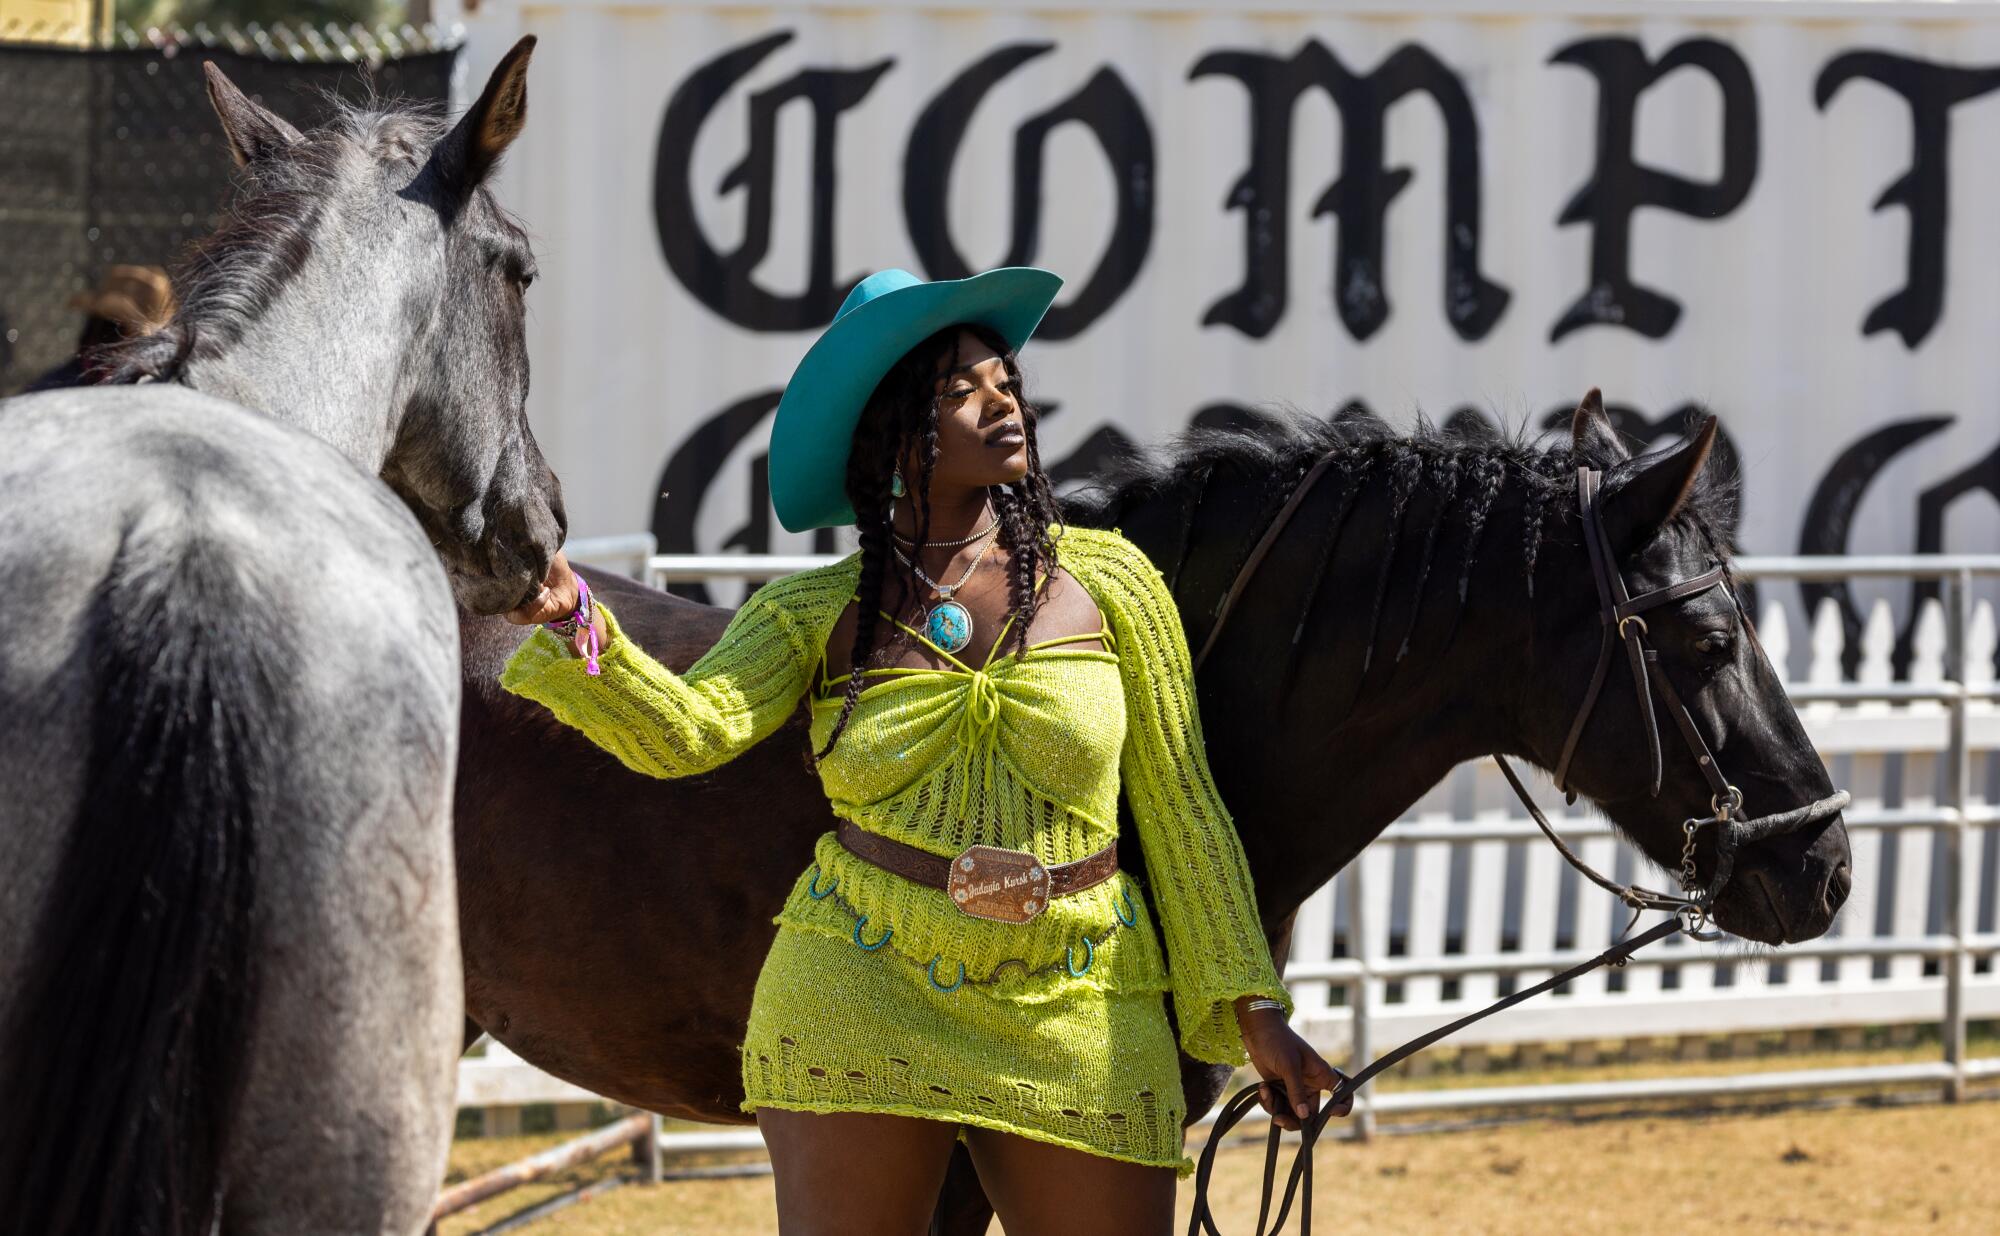 Jadayia Kursh poses for photos with horses in the Compton Cowboy area.